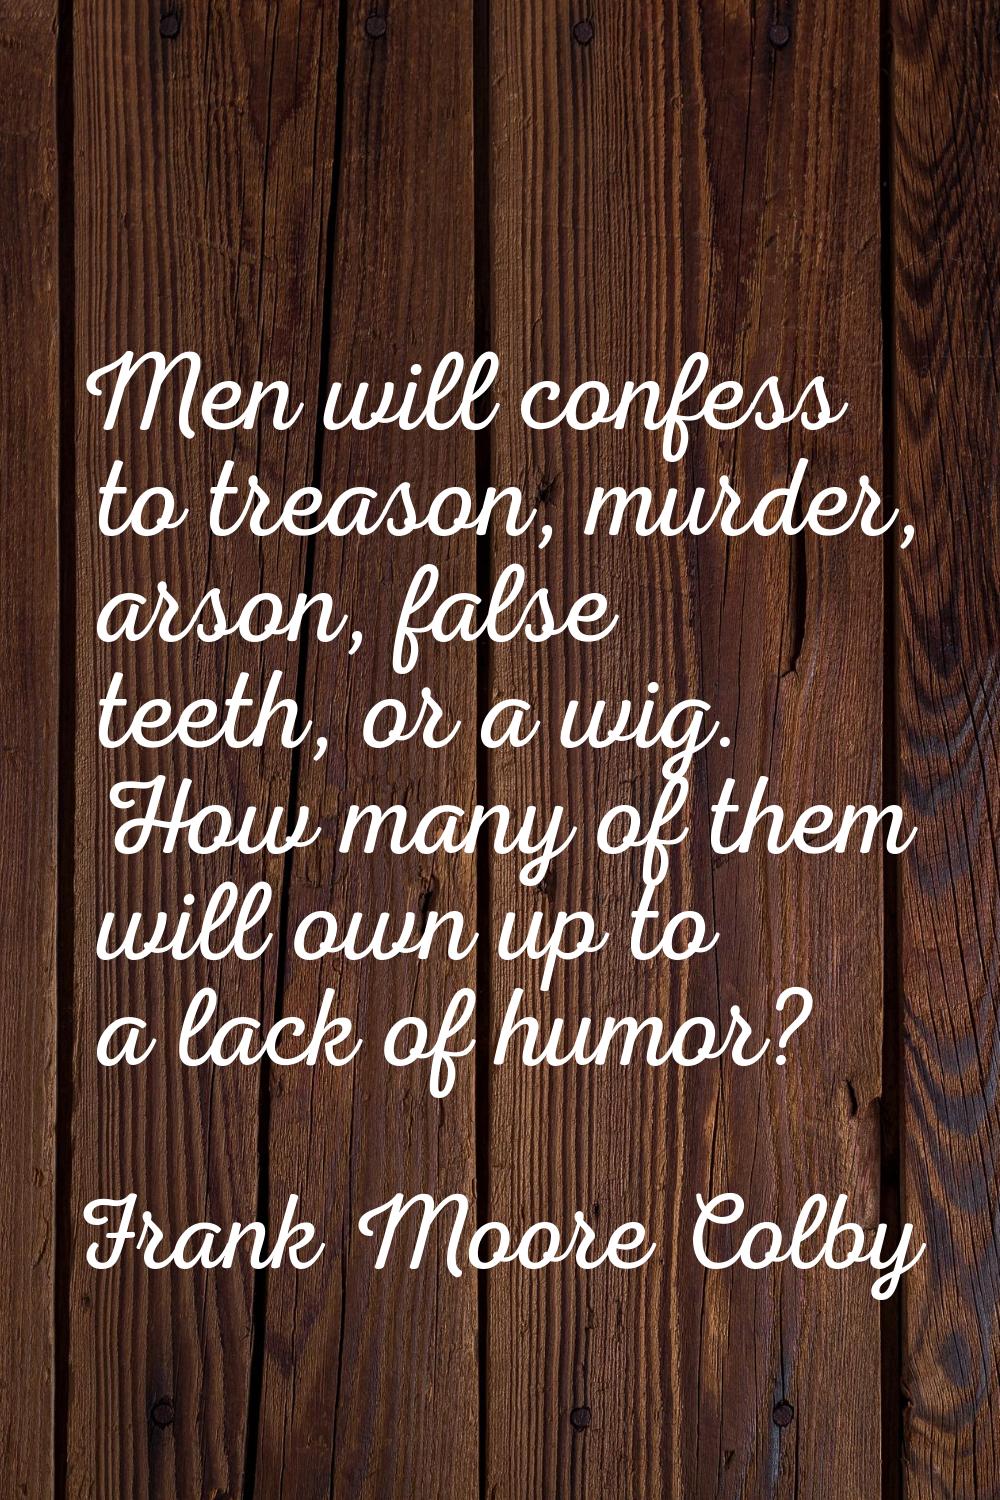 Men will confess to treason, murder, arson, false teeth, or a wig. How many of them will own up to 